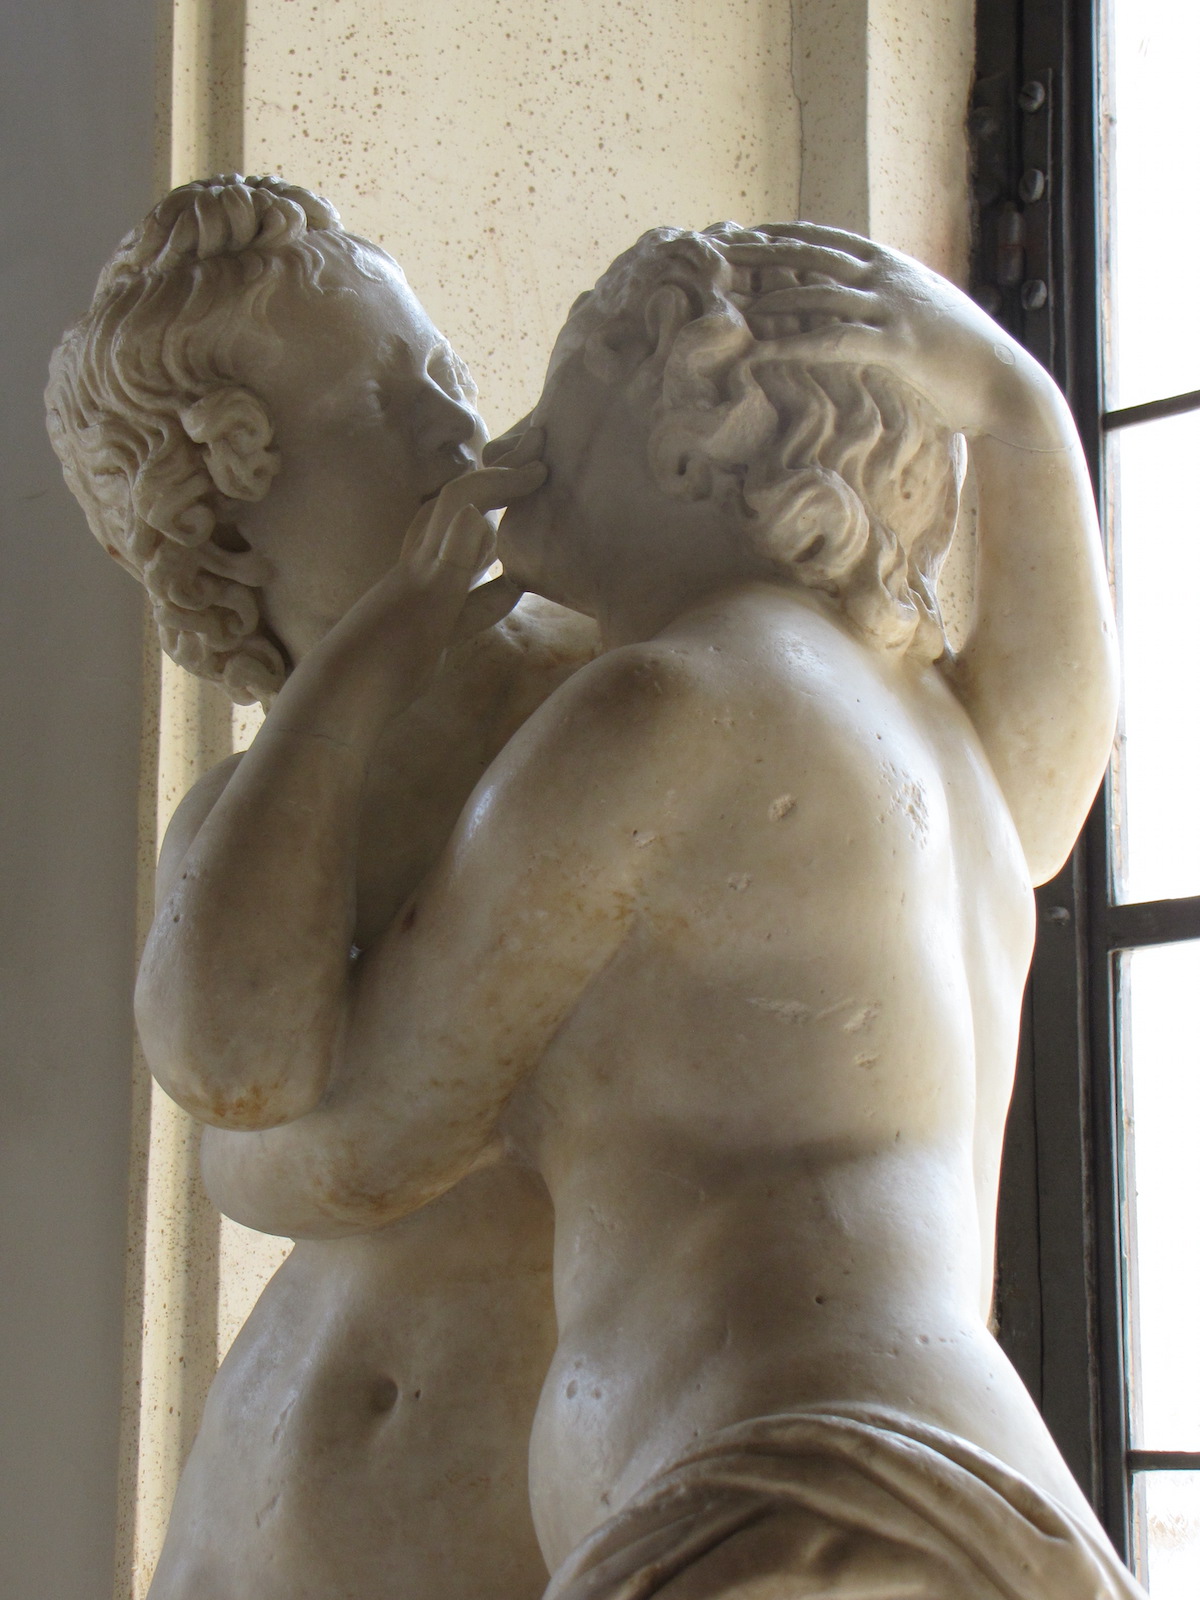 Marble statue of Cupid and Psyche at the Capitoline Museums in Rome